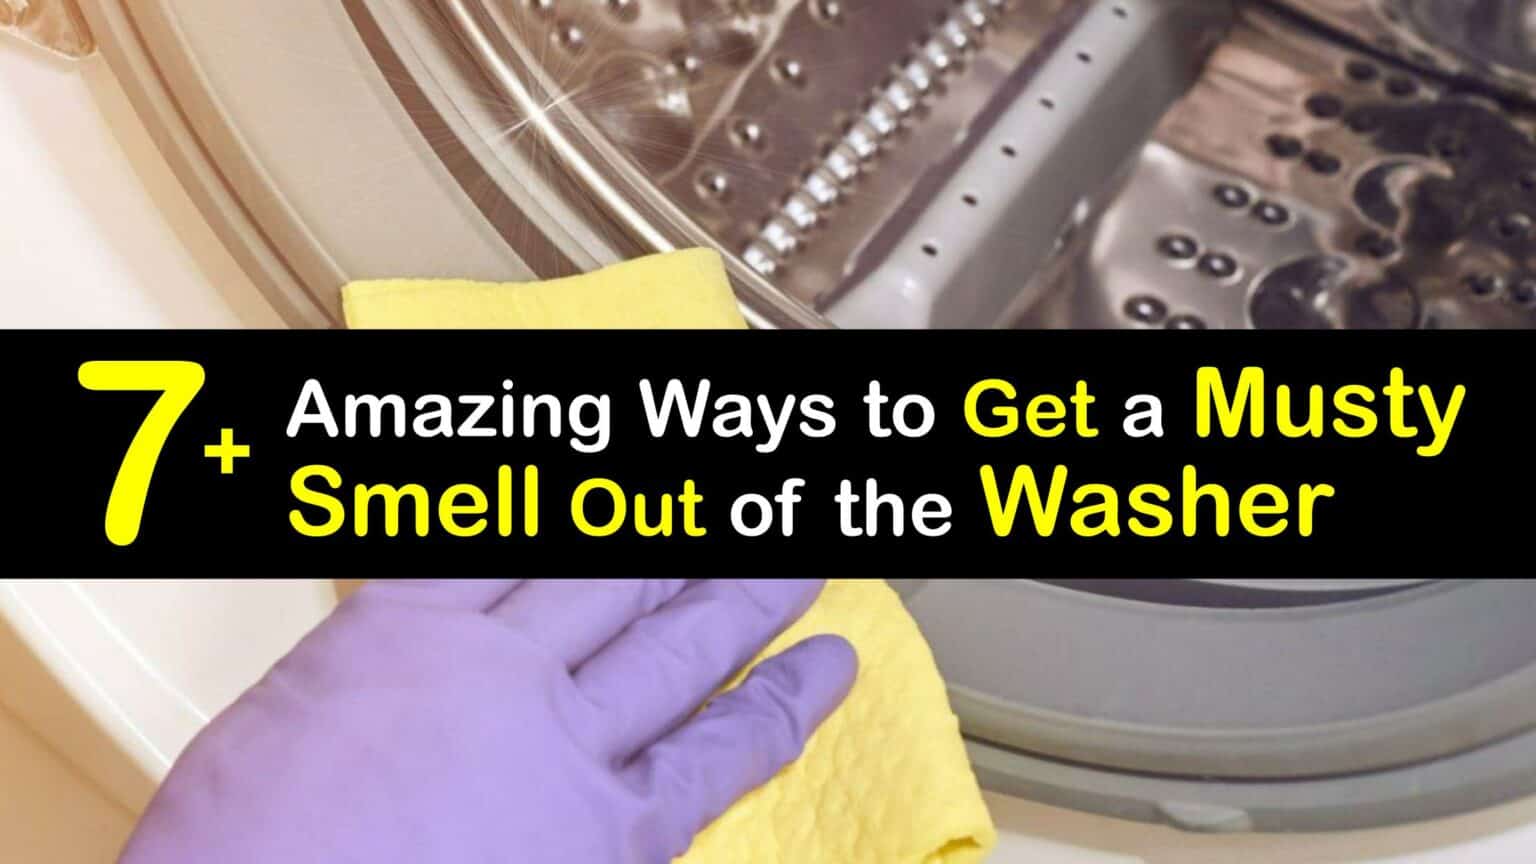 Washer Smells Removing Musty Washing Machine Odors